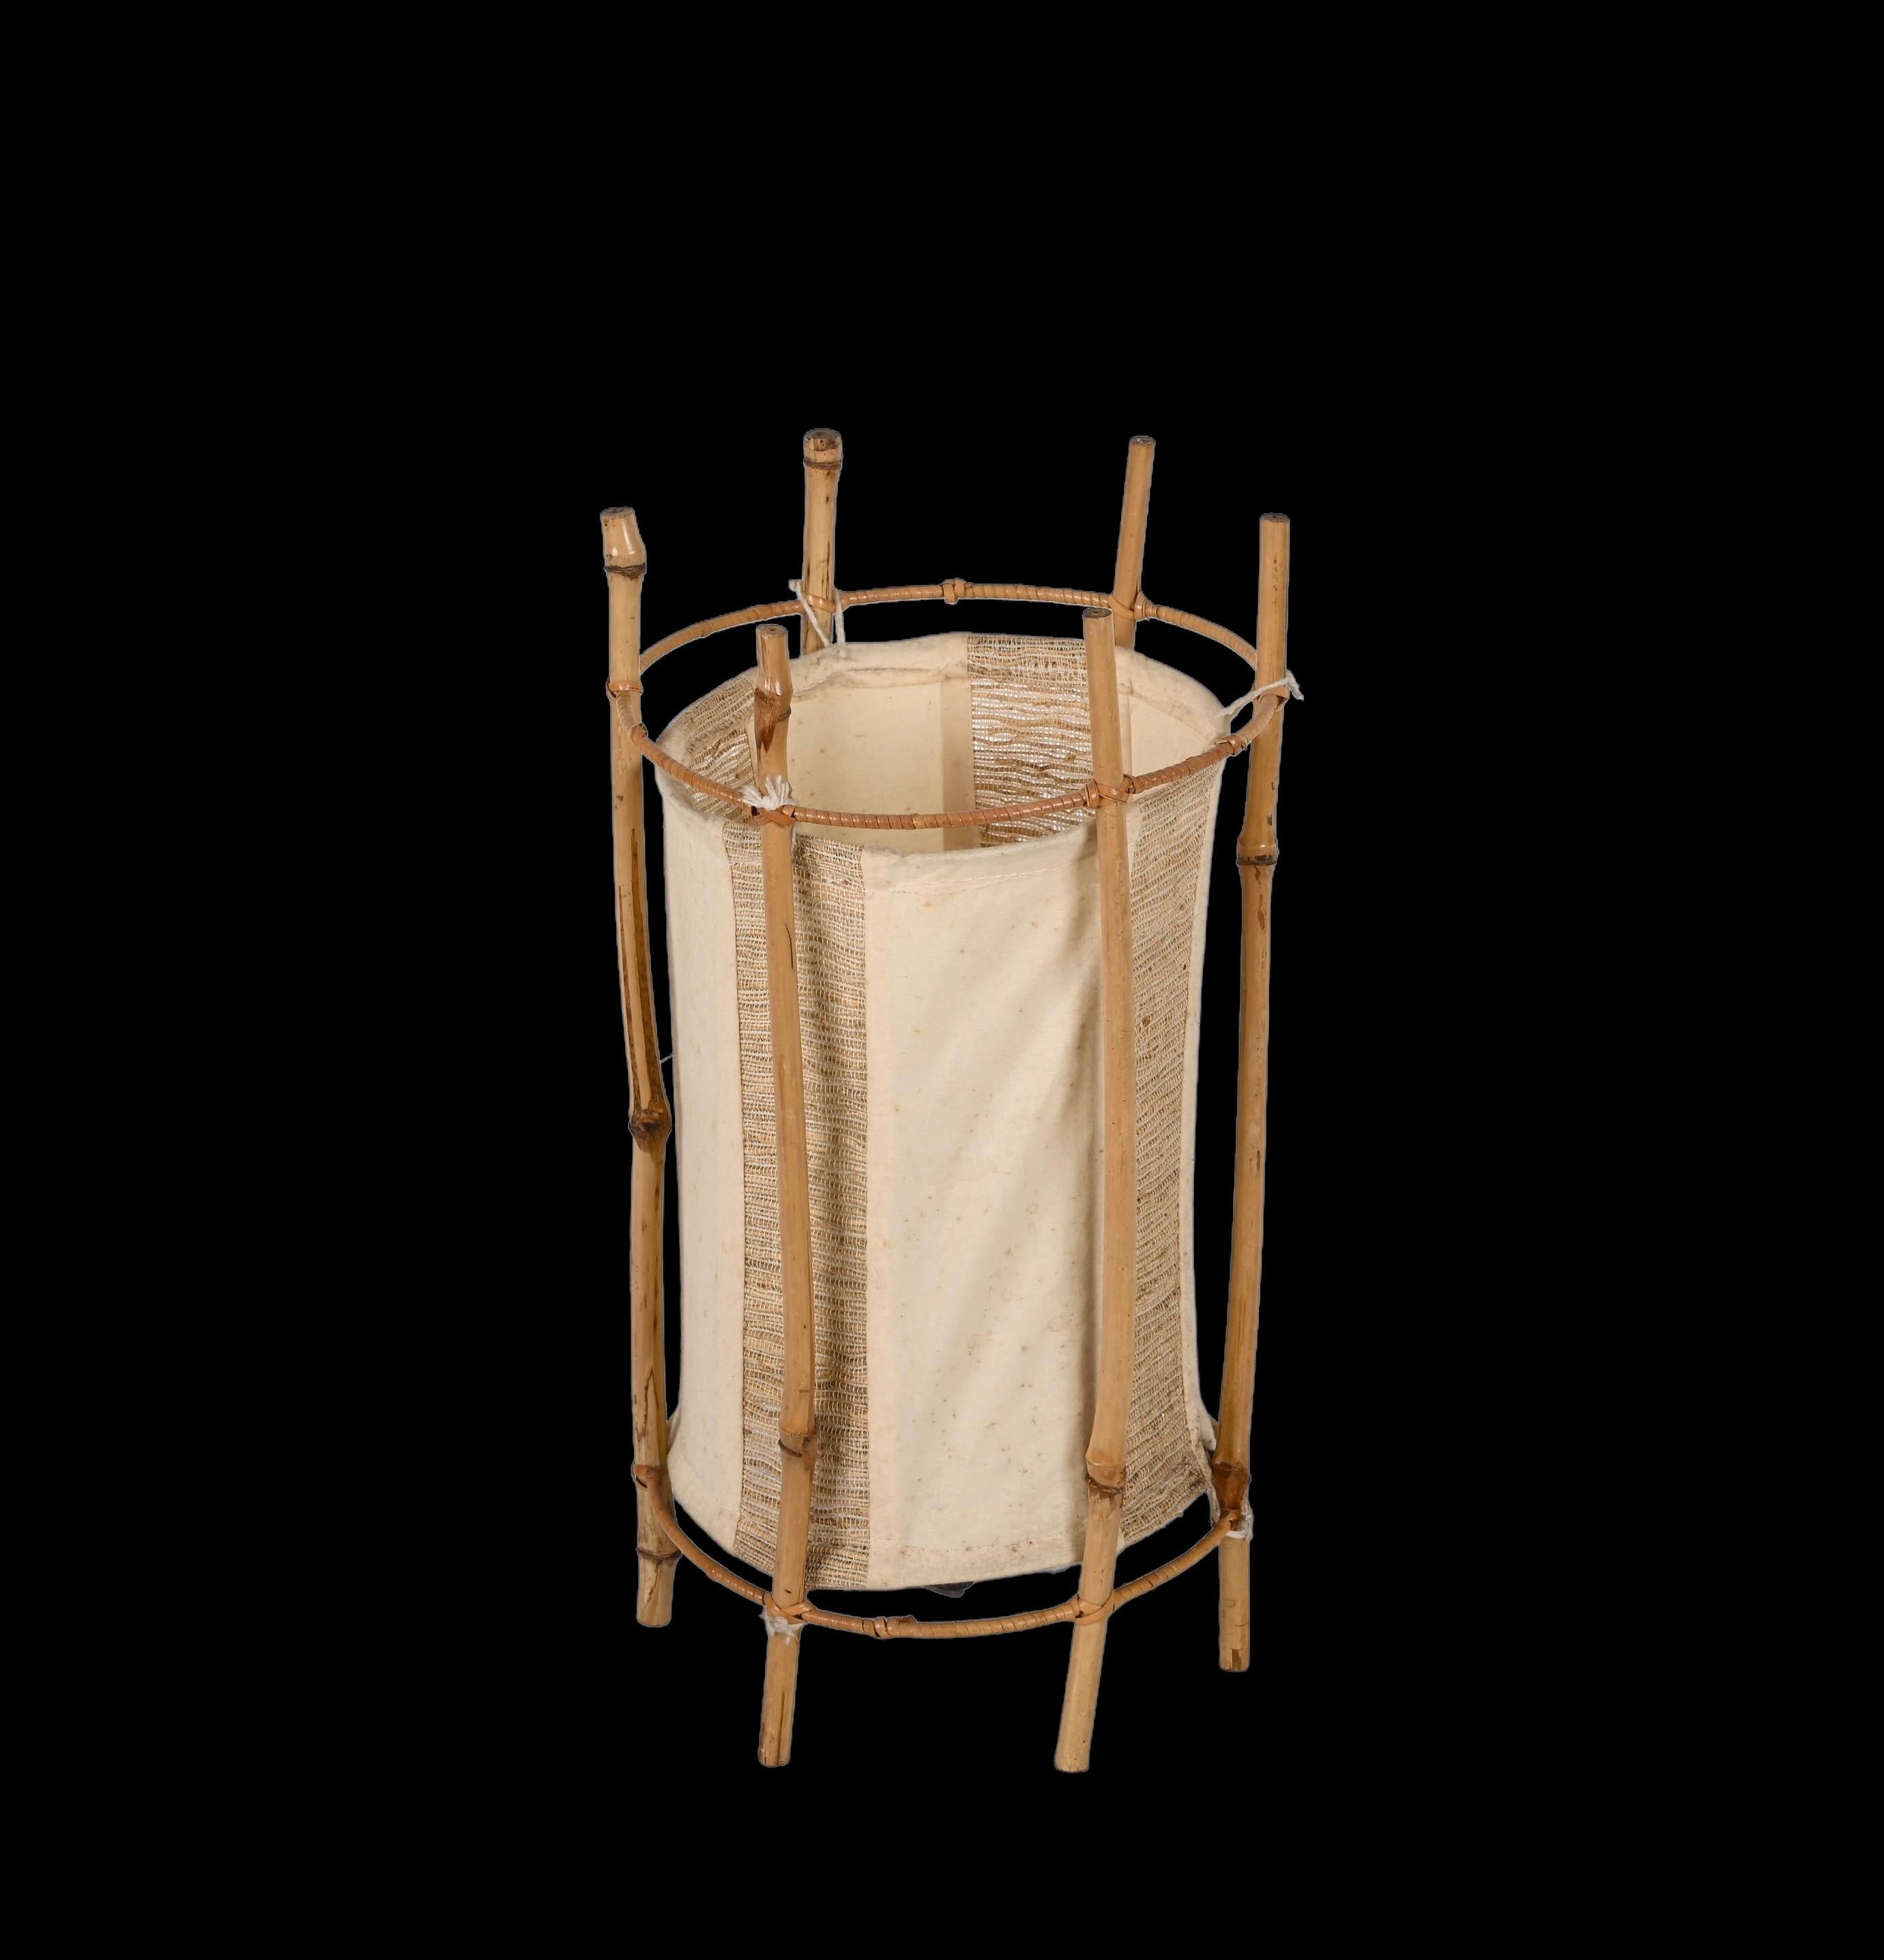 Wonderful mid-century table lamp in bamboo and rattan. This stunning lighting item was made in France in the 1960s in the style of Louis Sognot.

The outer structure is made up of six bamboo and rattan bamboo stems and contains a cylindrical shade